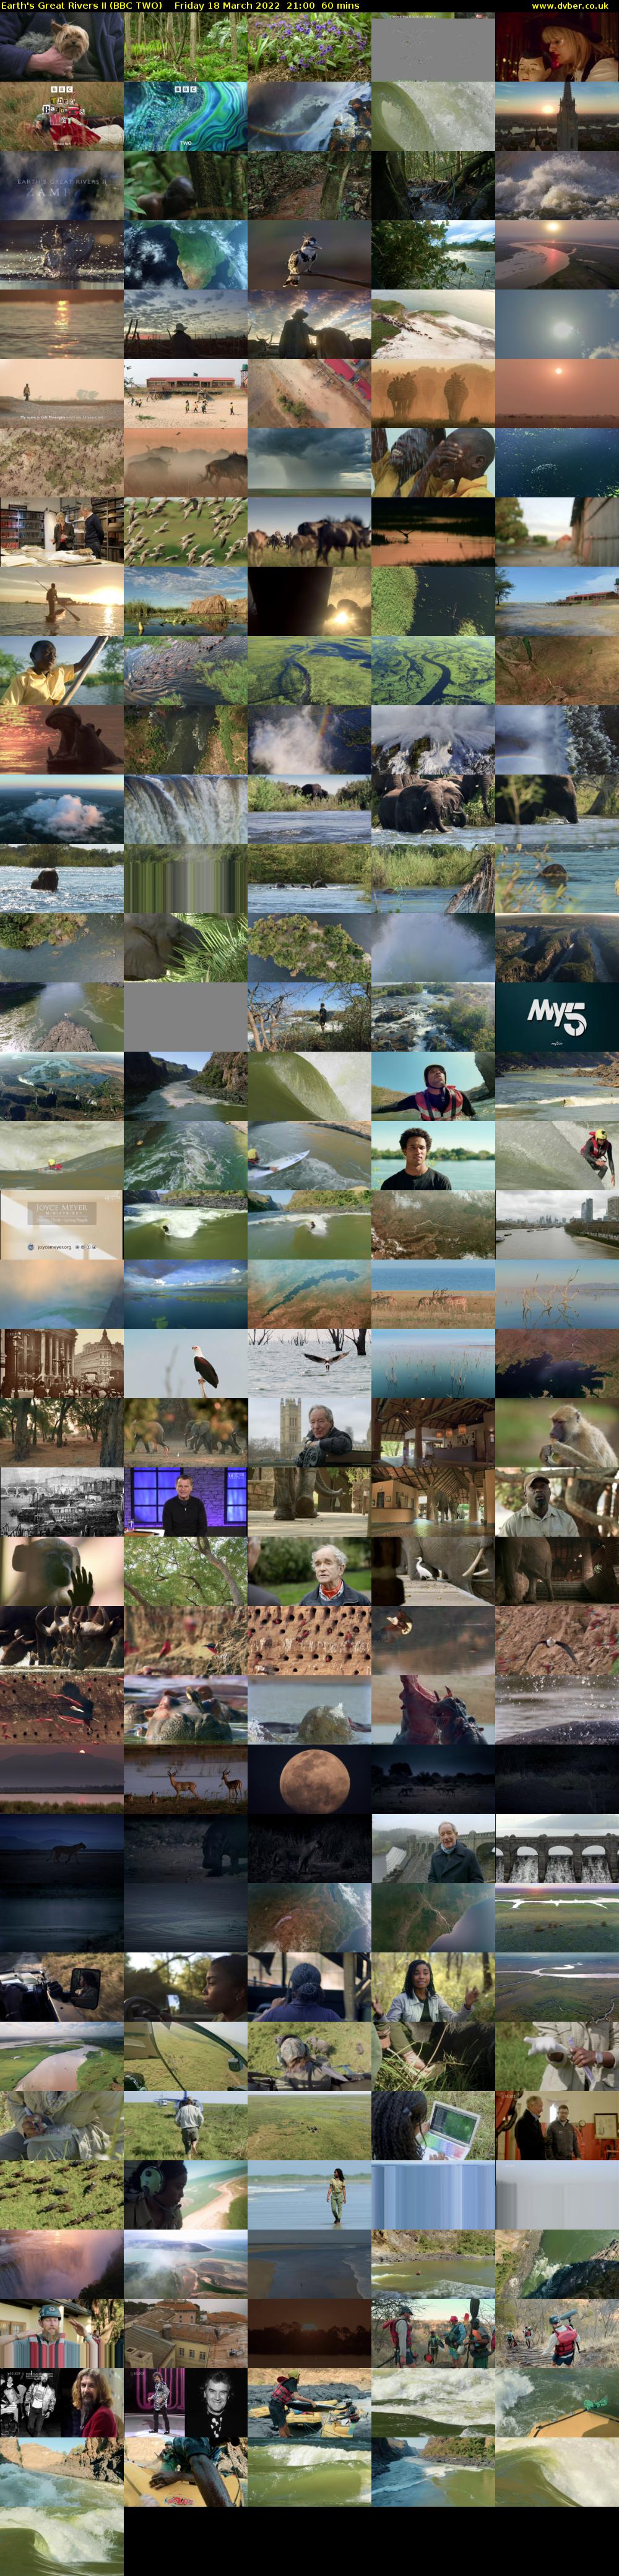 Earth's Great Rivers II (BBC TWO) Friday 18 March 2022 21:00 - 22:00